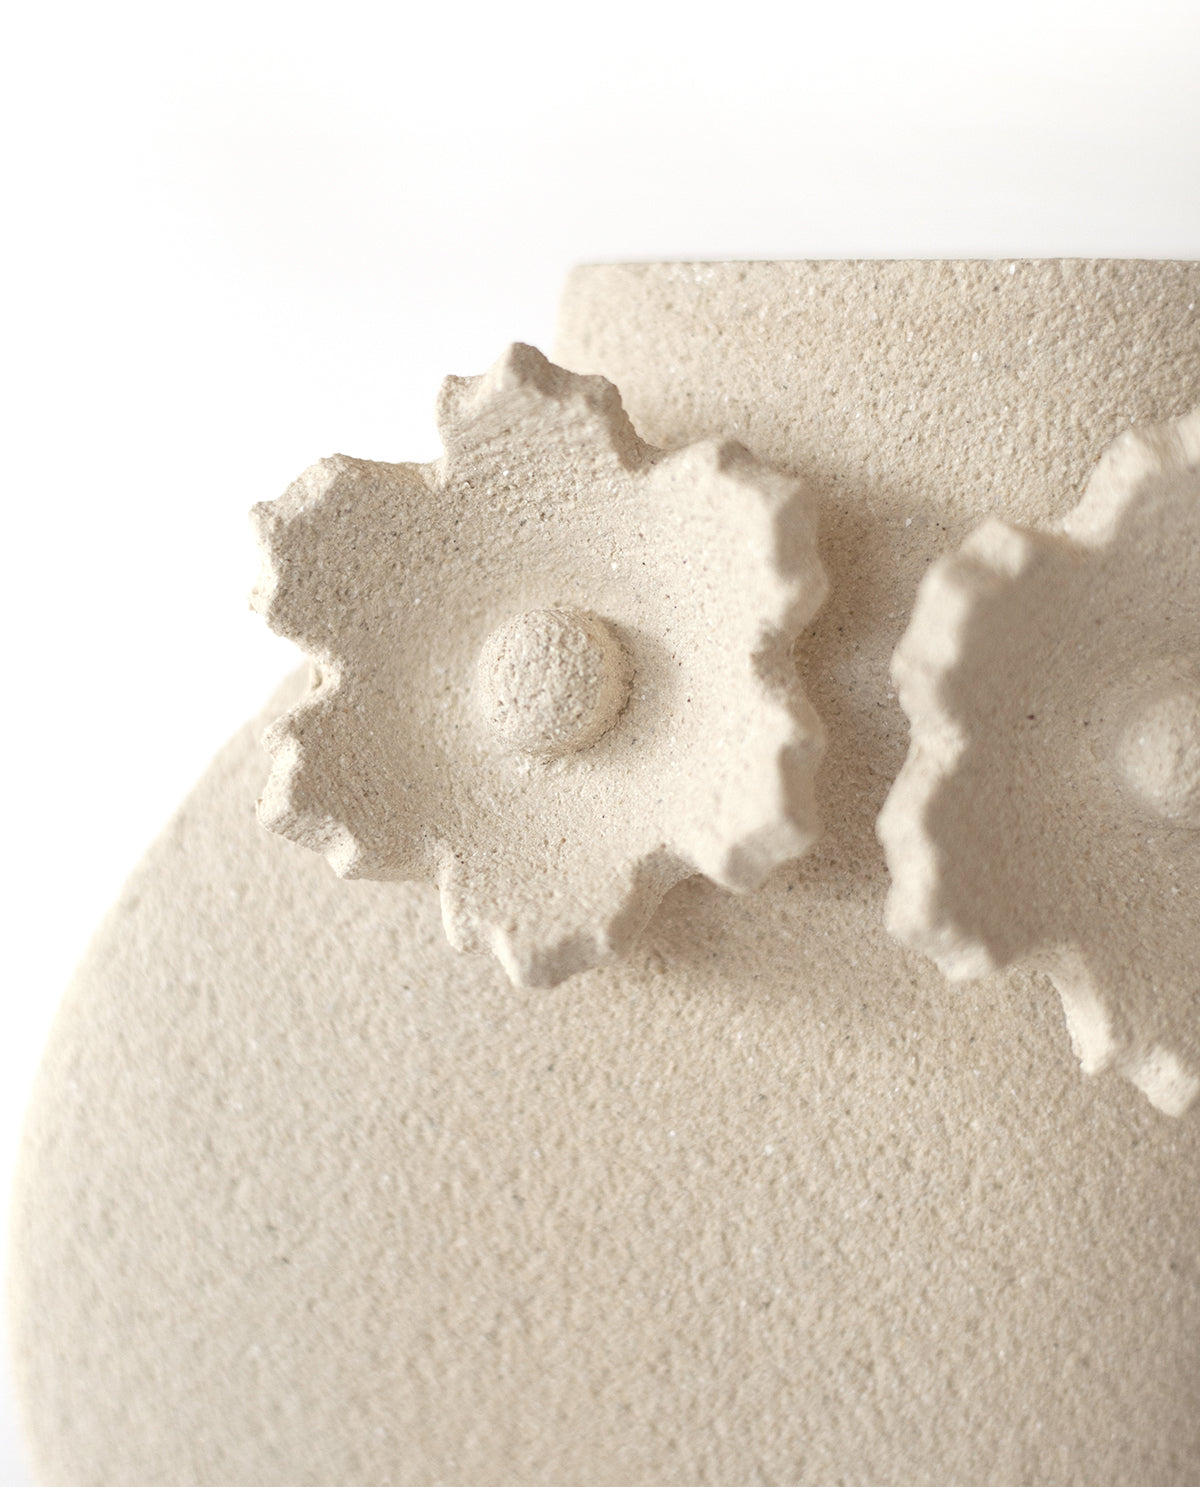 Handmade floral vase by INI CERAMIQUE with flower sculptures and textured finish